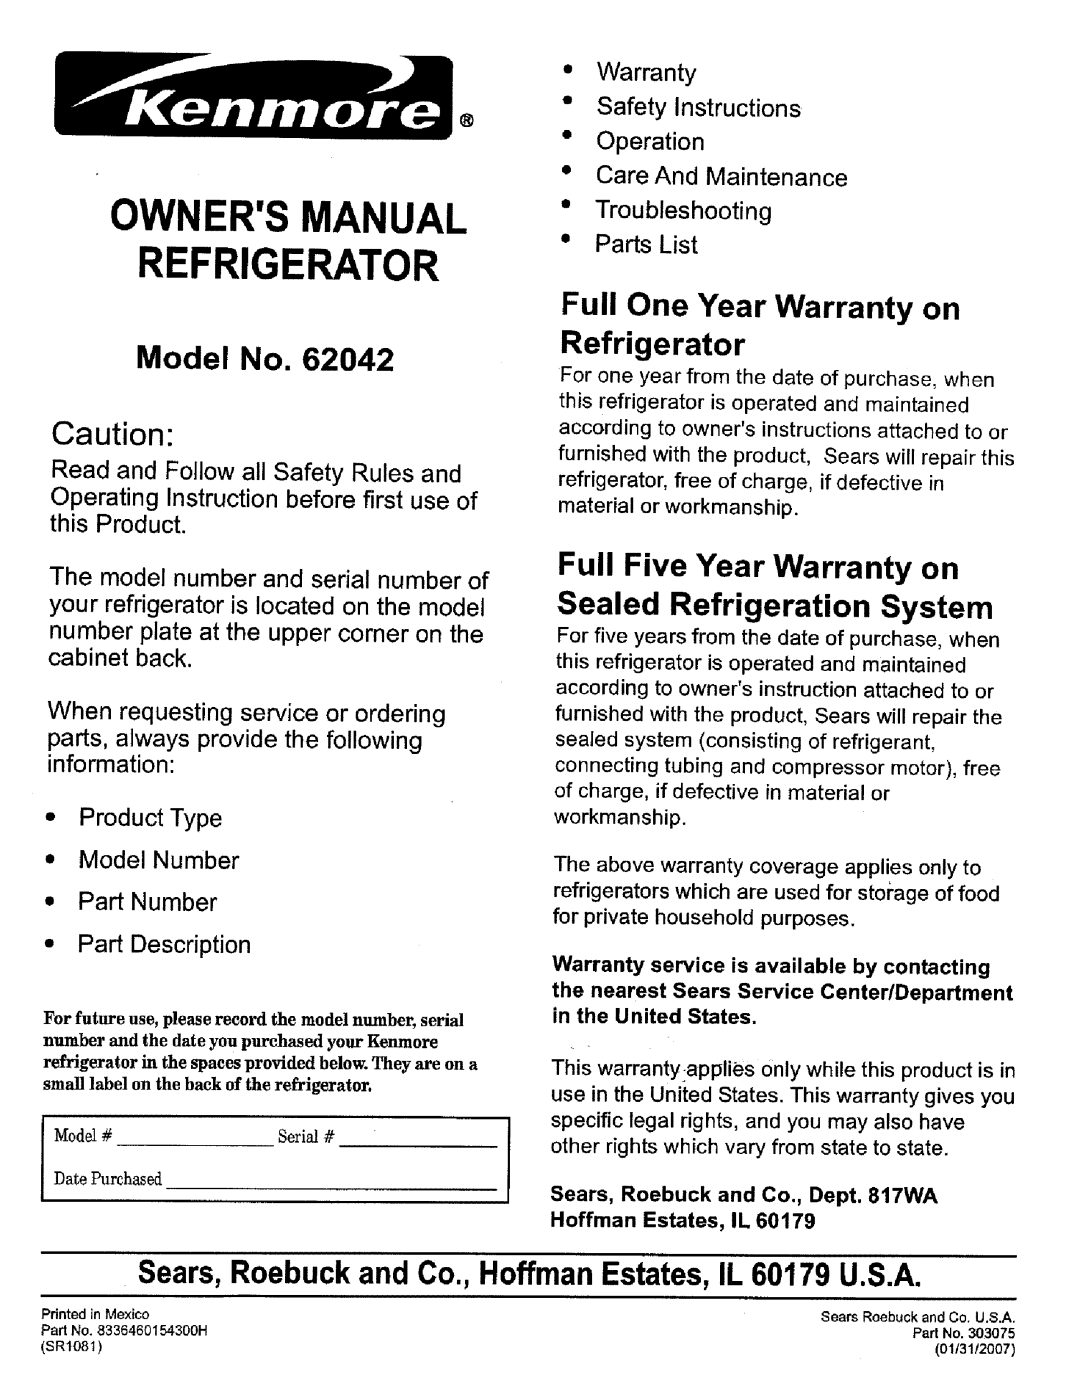 Kenmore 62042 owner manual When requesting service or ordering, parts, always provide the following information, Model No 